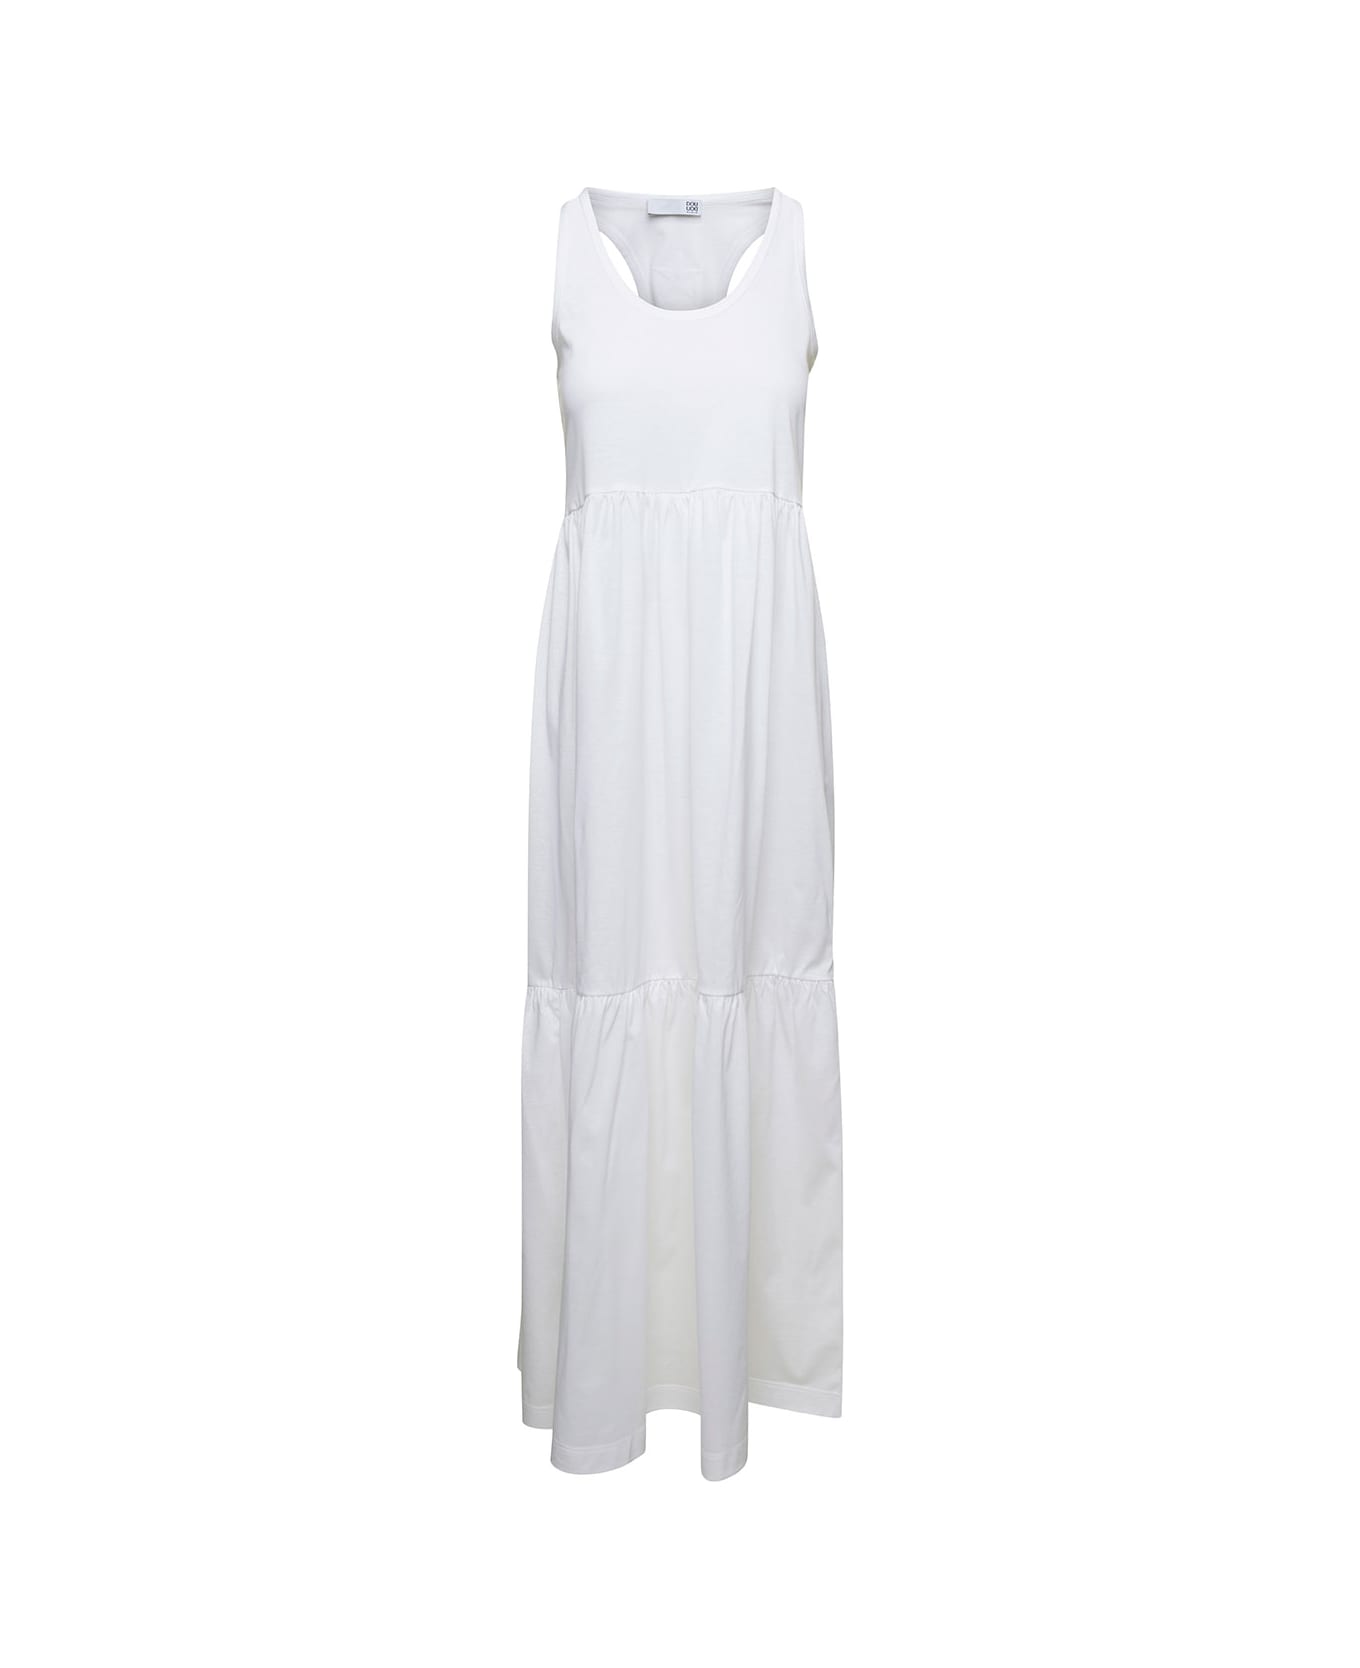 Douuod Long White Sleeveless Dress With Flounced Skirt In Cotton Woman - White ワンピース＆ドレス